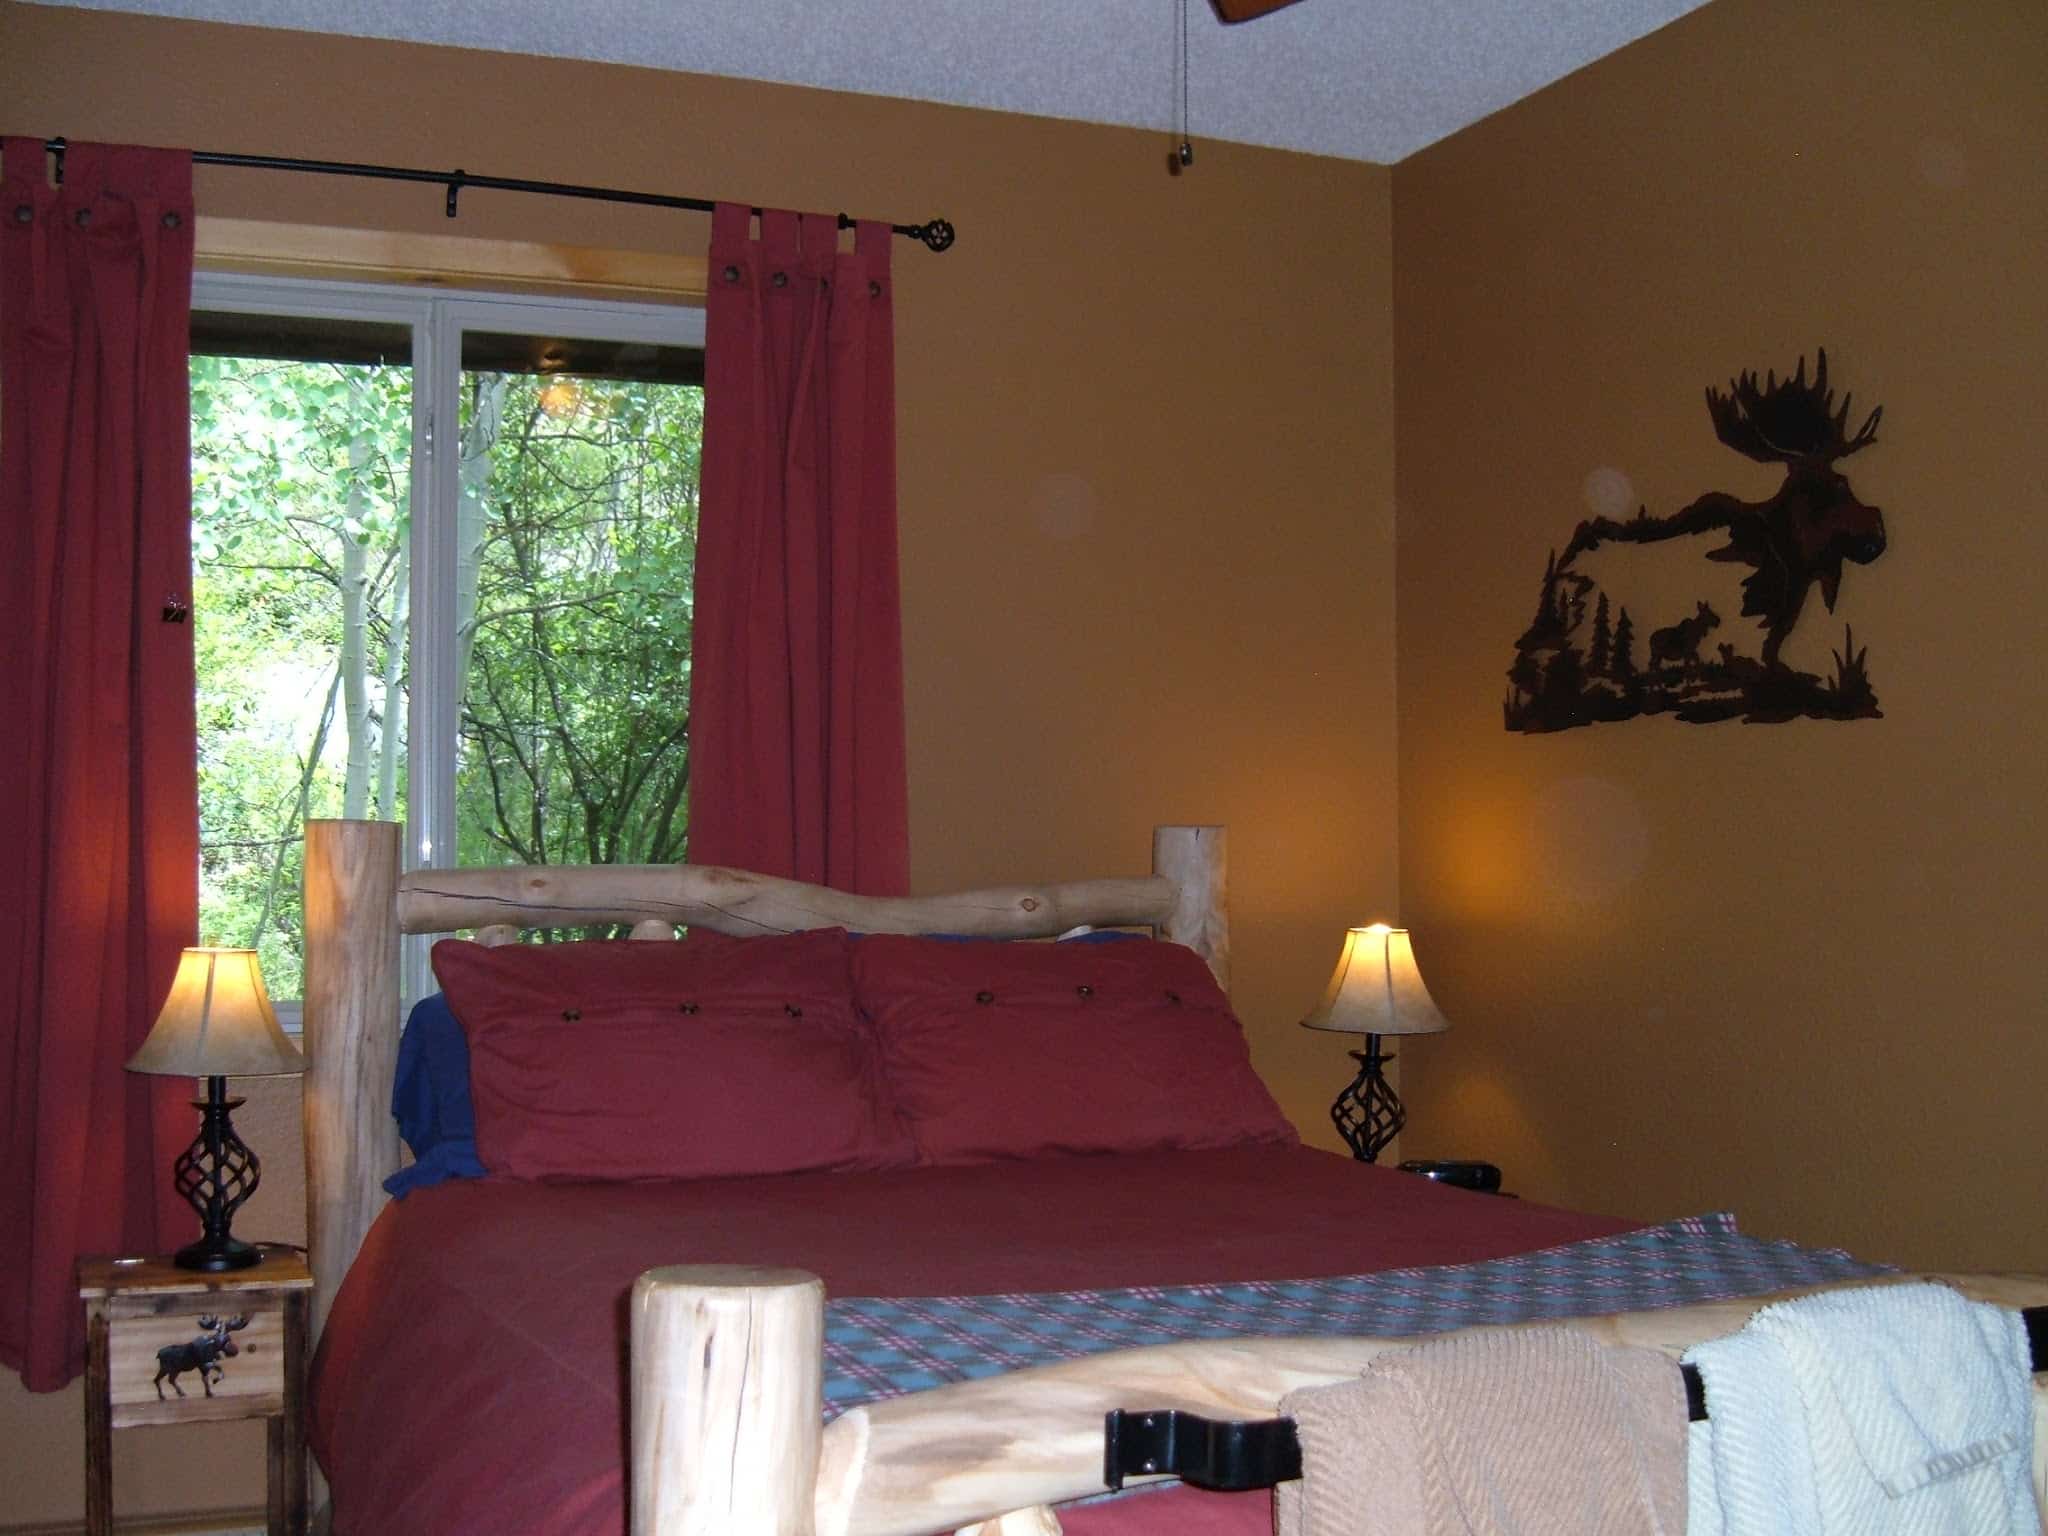 Charming log bed with a red duvet comforter, brown walls, metal art work of a moose on the wall, bed lamp, and a ceiling fan. Brown and green towel sets hanging on a rod iron towel bar at the foot of the bed.